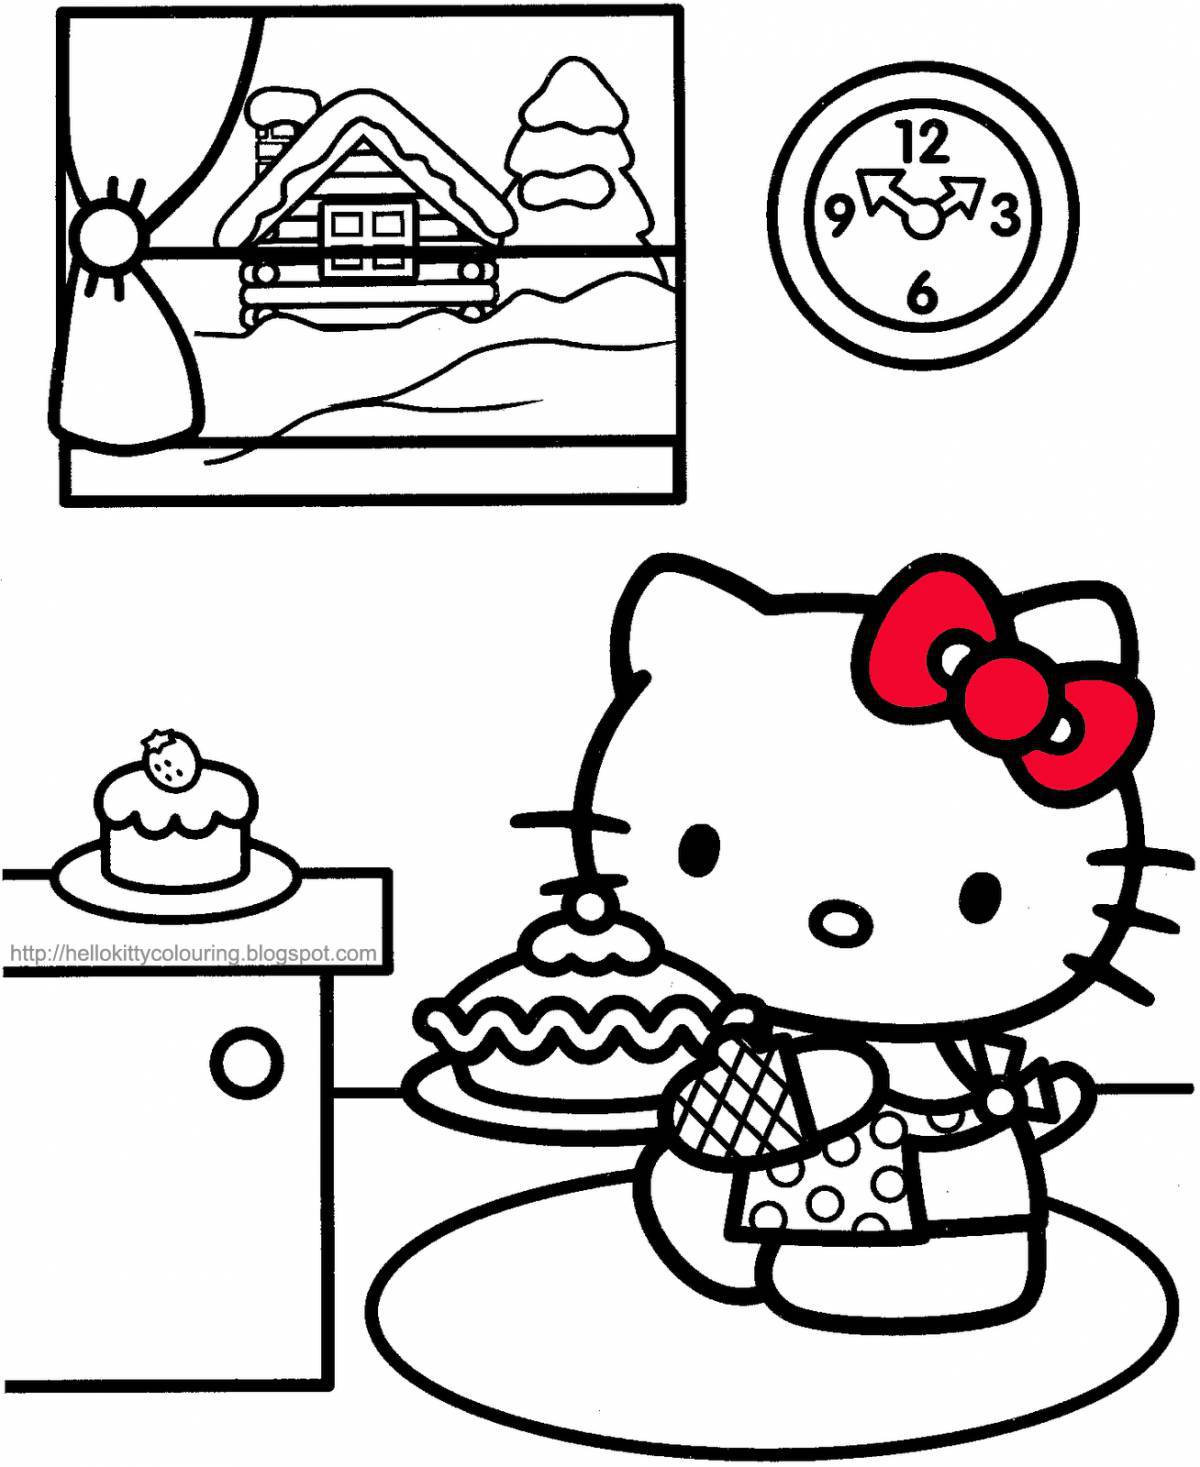 Cheerful hello kitty with clothes